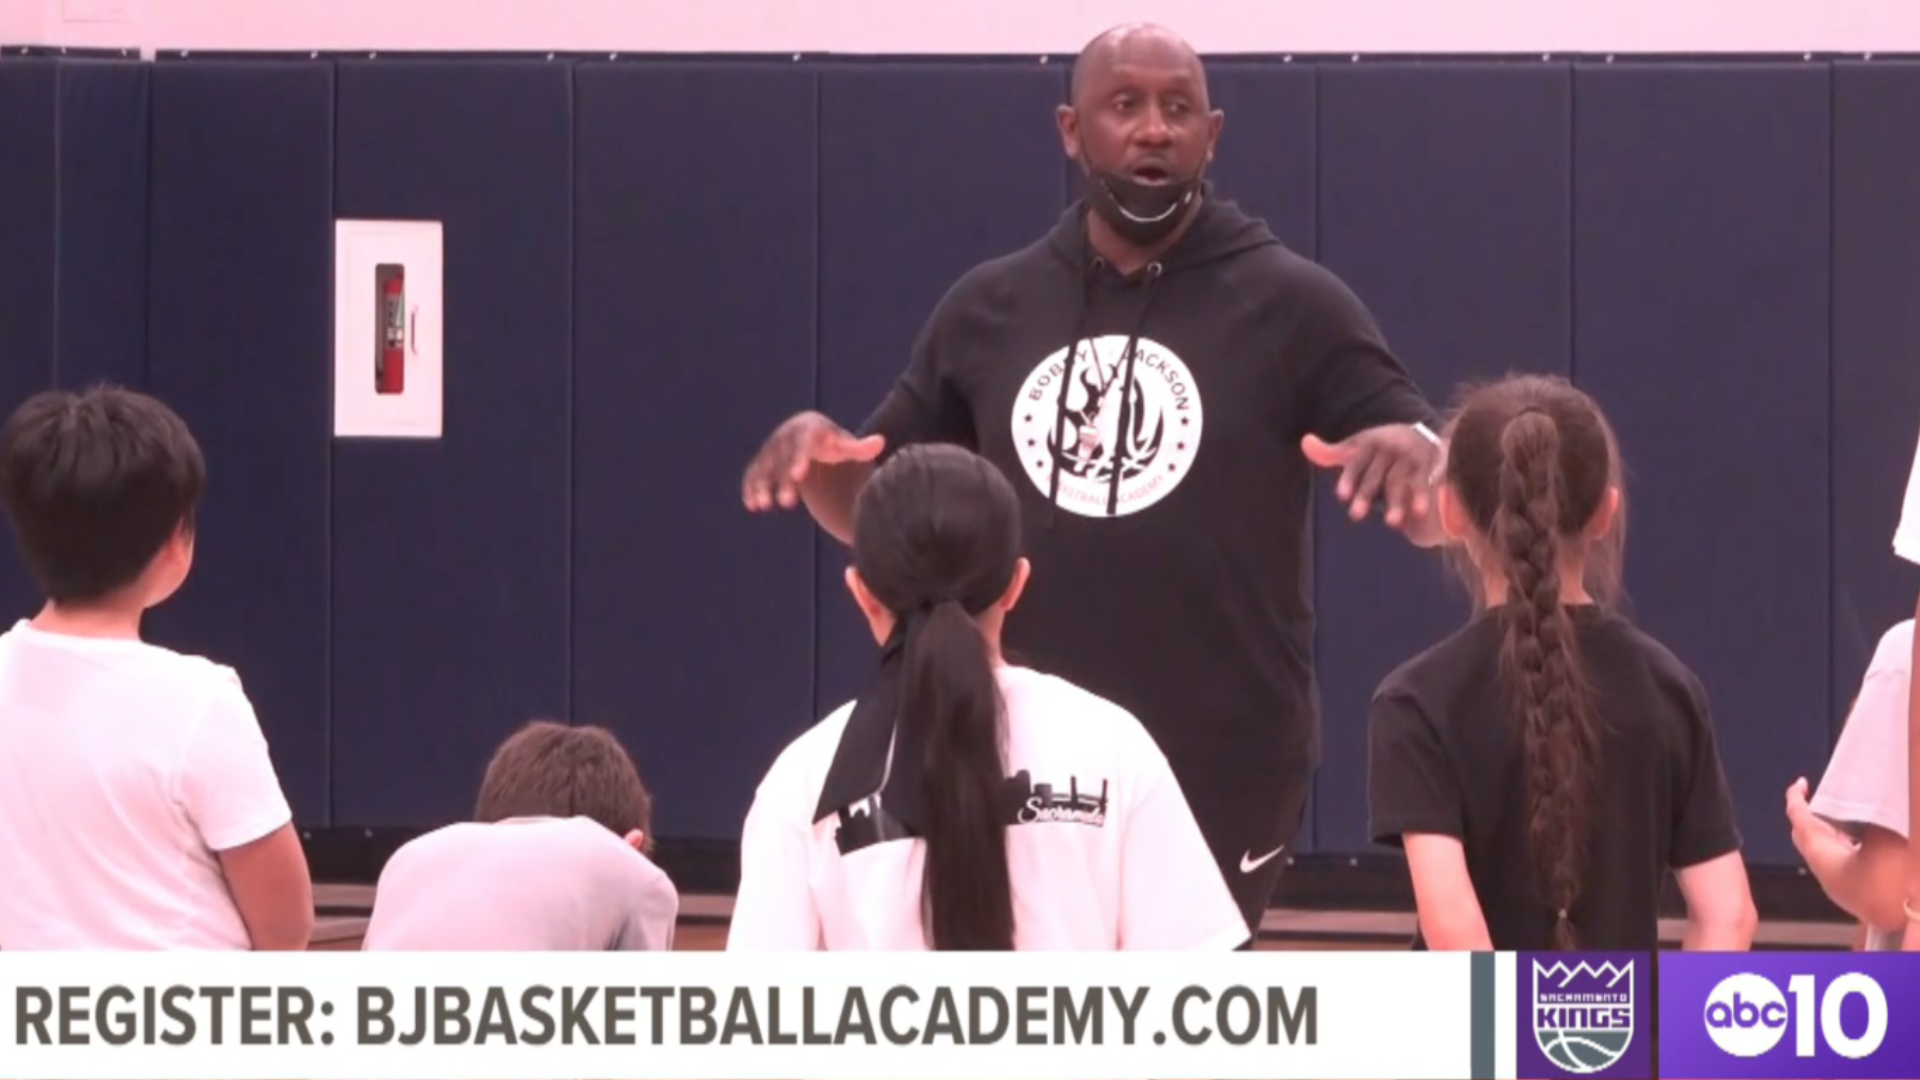 When he's not developing NBA stars, you can find former Sacramento Kings star Bobby Jackson training Sacramento area youth.